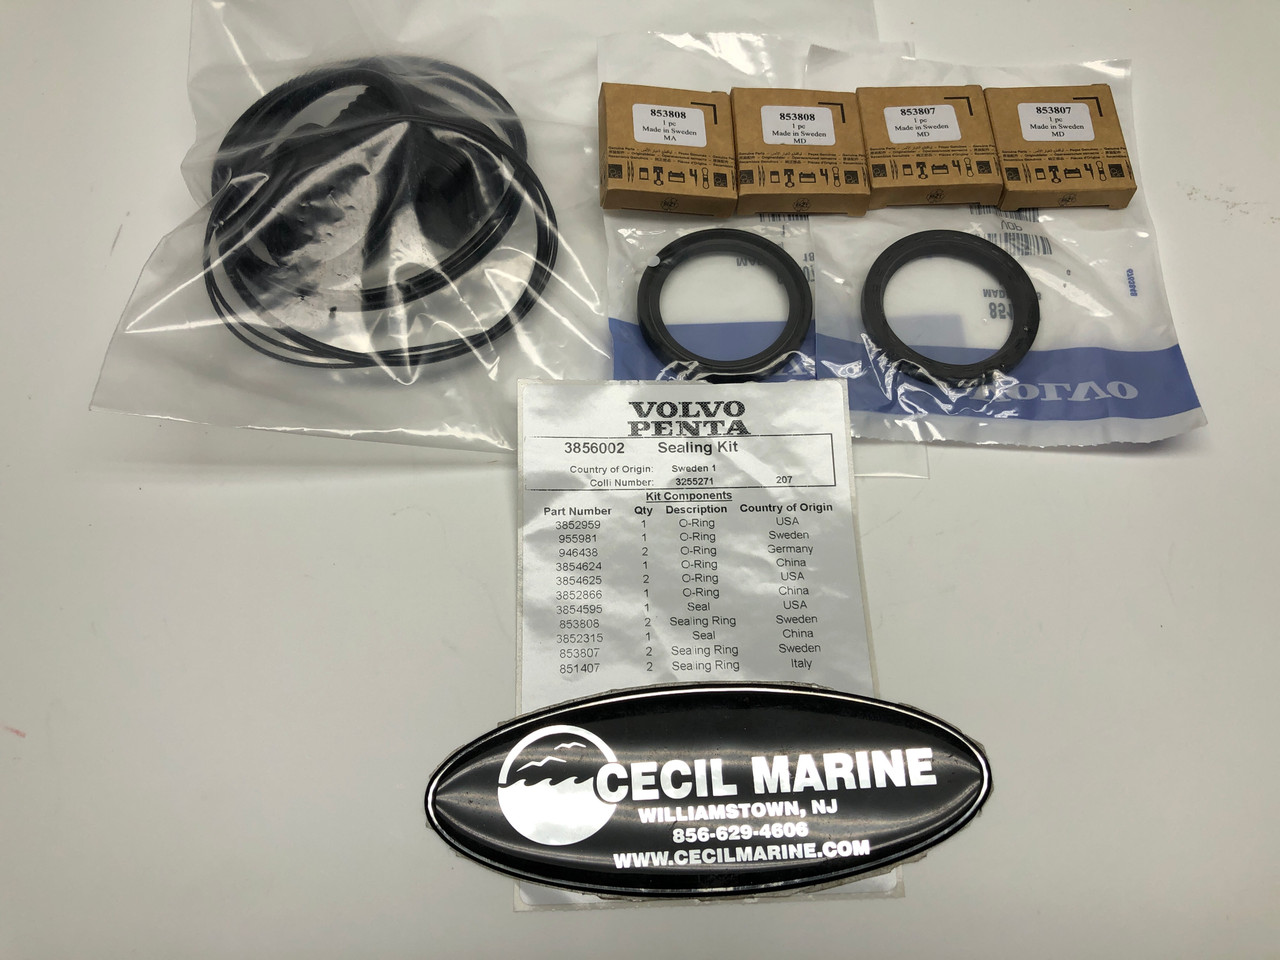 $149.99* GENUINE VOLVO no tax* SEALING KIT FOR DPS-S & DPS-M 3856002 *In Stock & Ready To Ship!